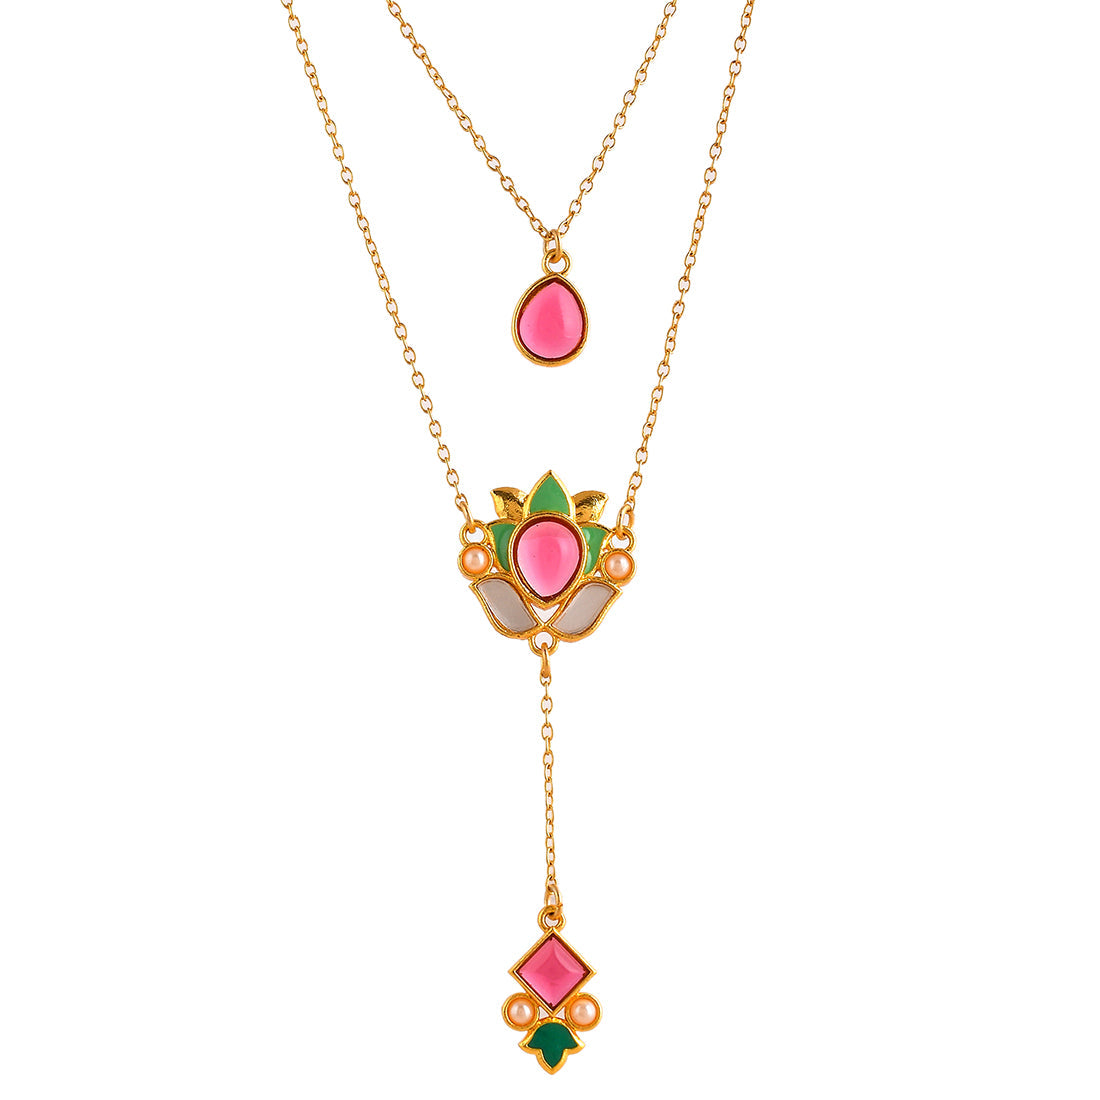 Women's Forever More Pink Stones Enamelled Layered Necklace Jewellery Set - Voylla